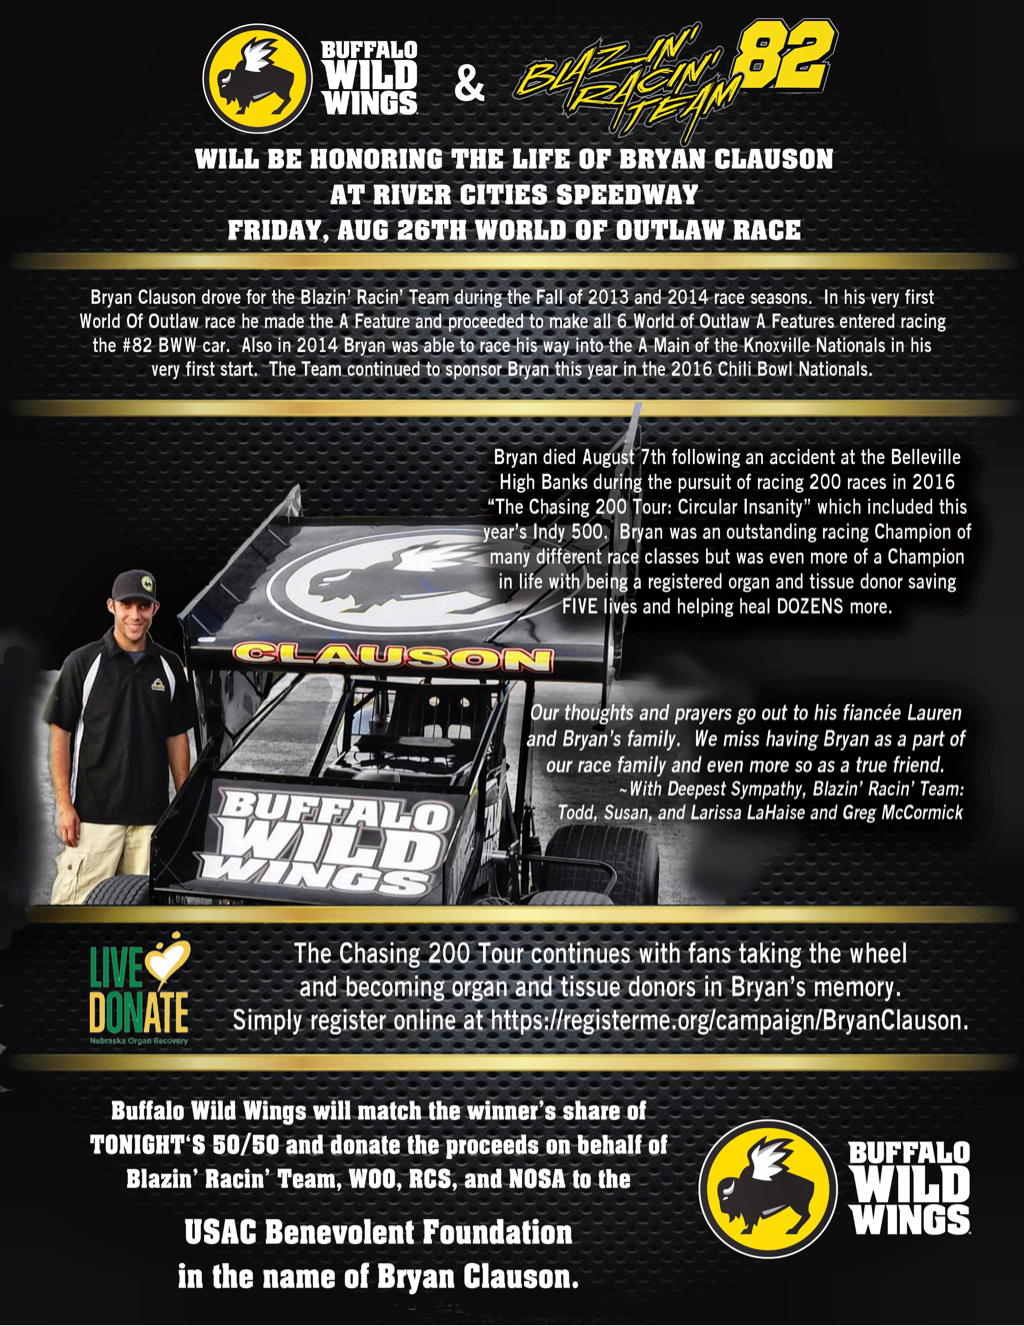 Buffalo Wild Wings & 82 Blazin' Racin' Team will be honoring the life of Bryan Clauson at River Cities Speedway Friday, Aug 26th World of Outlaws Sprint Car Race 